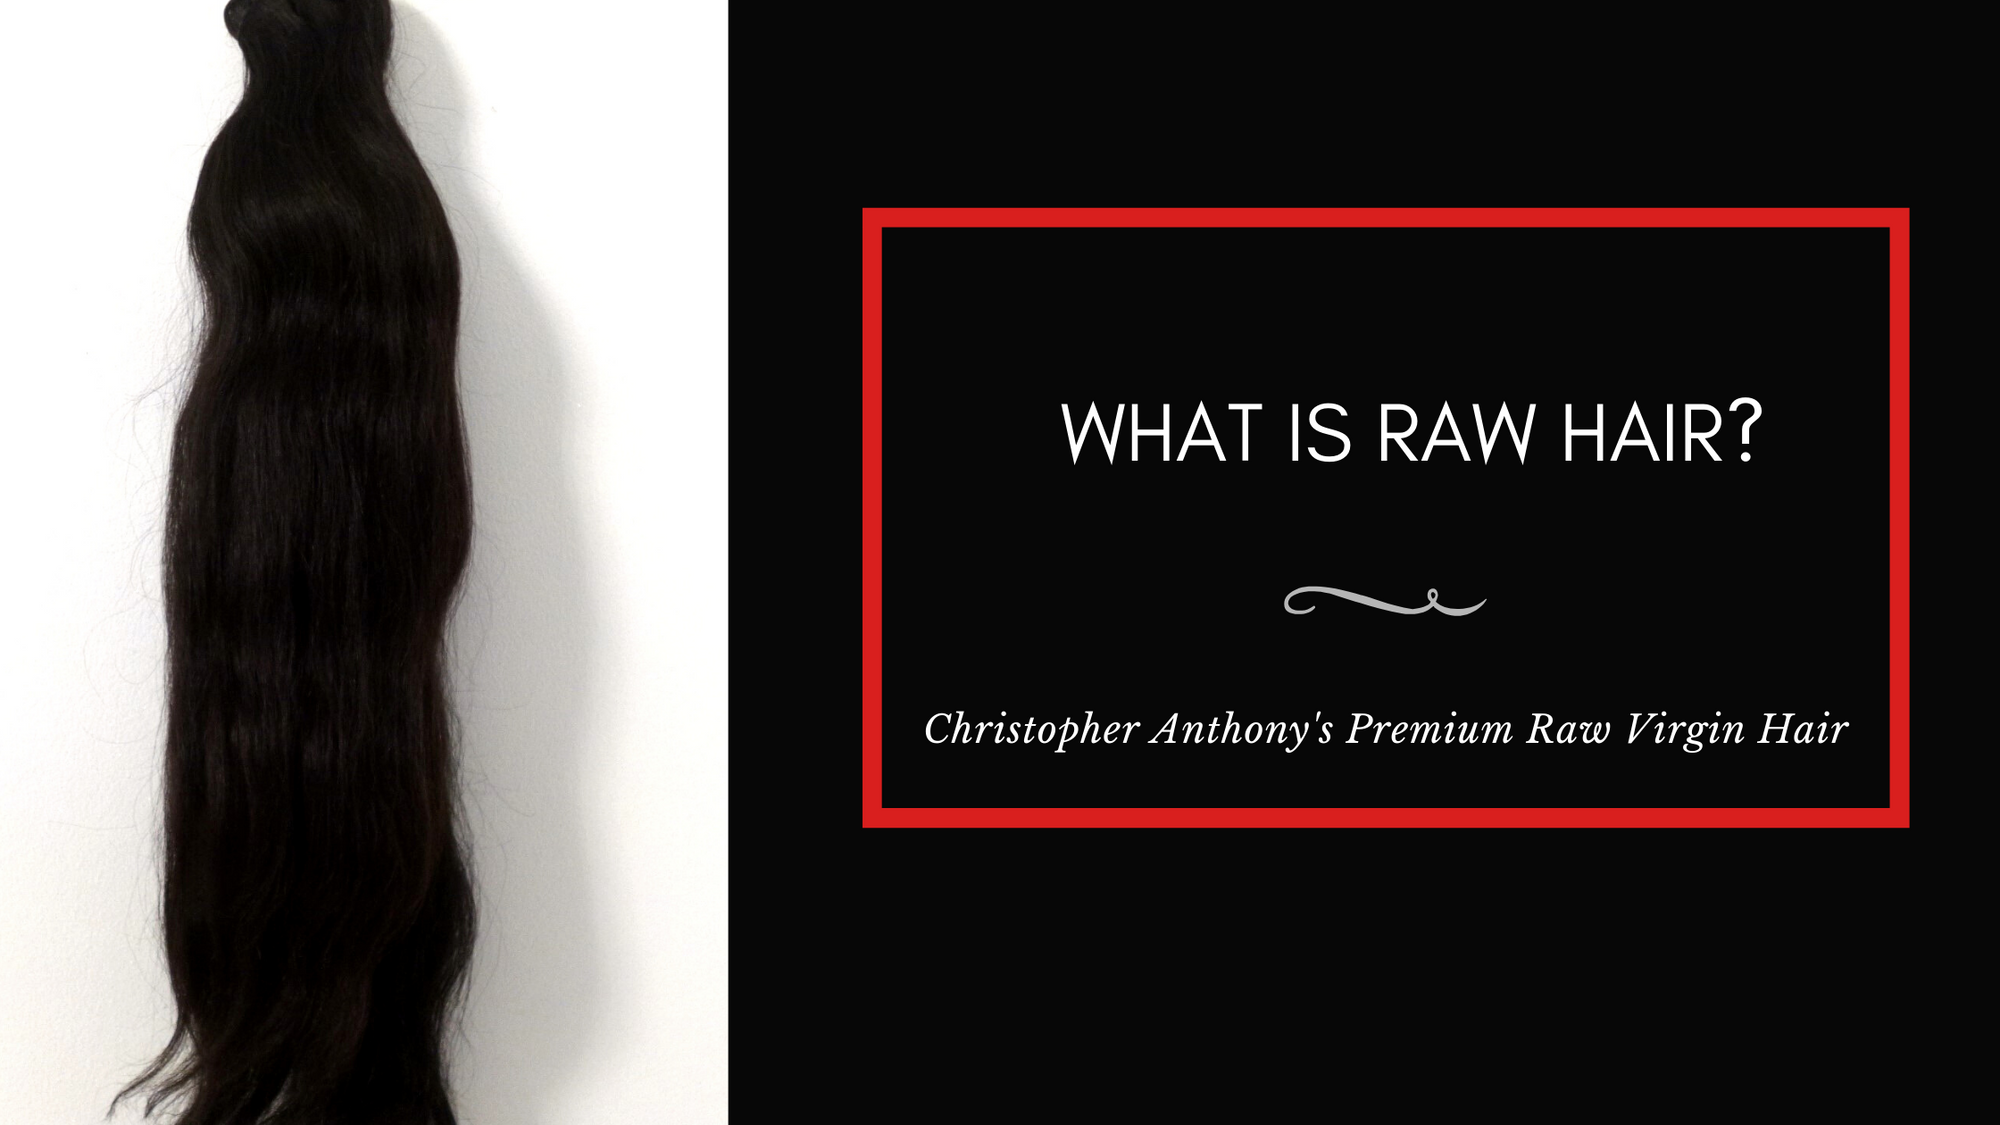 What is Raw Hair?